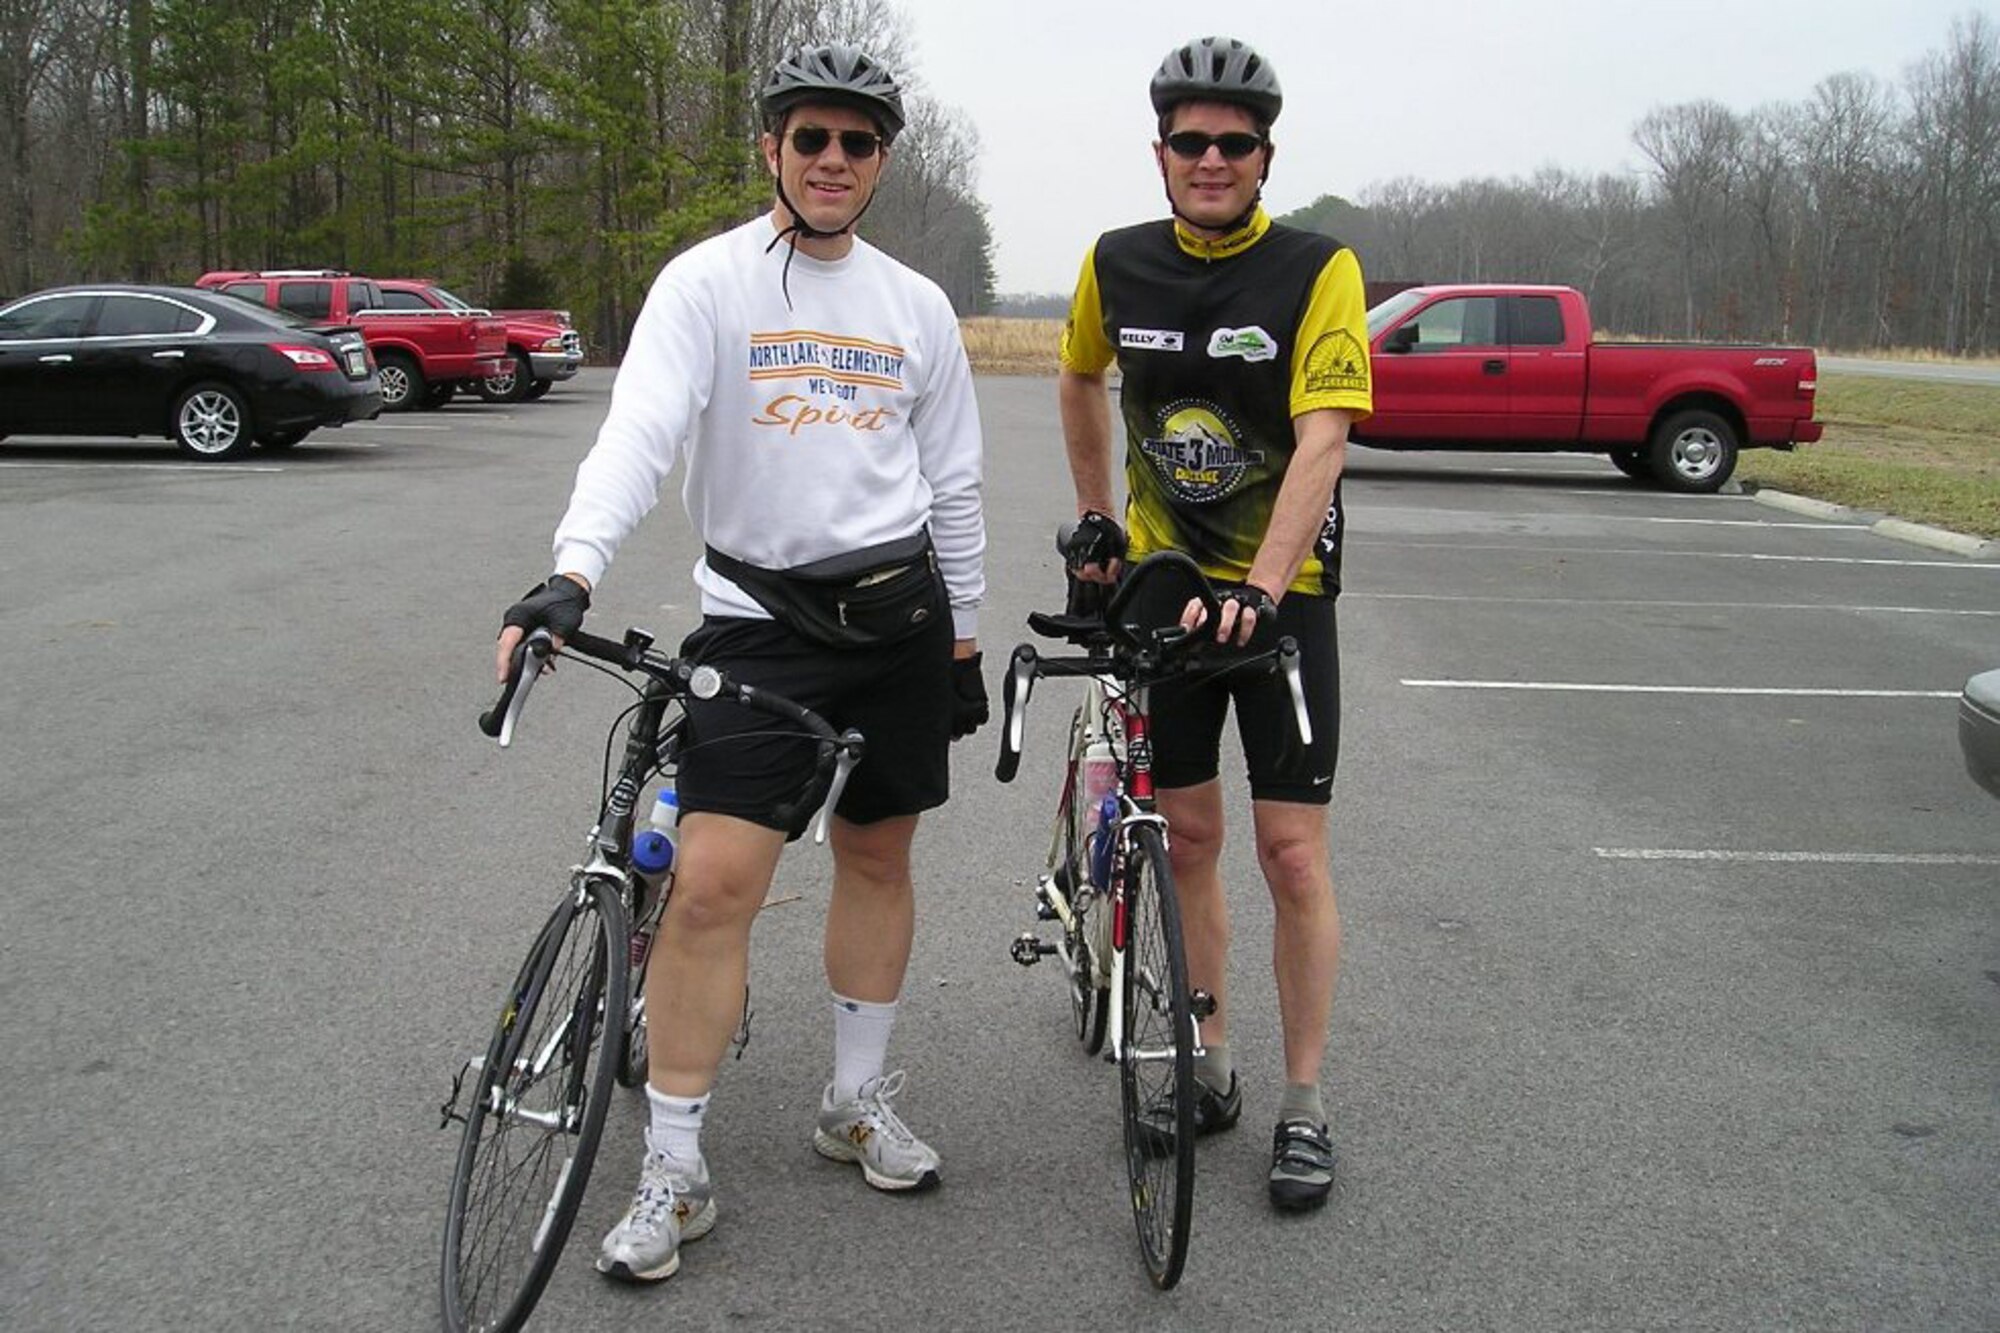 From left, Dr. Wim Ruyten, a physicist with Euclidean Optics Inc., a subcontractor with Aerospace Testing Alliance (ATA), has teamed up with Kevin Sipe, ATA project manager, to help Dr. Ruyten prepare for the “Itching for a Cure: Road to Chicago” fundraising challenge, organized by the Primary Sclerosing Cholangitis (PSC) Partners Seeking a Cure foundation. Dr. Ruyten plans to ride his bicycle from Tullahoma, Tenn. to Chicago, the site of the fifth annual PSC Conference during the week and a half prior to the conference (April 23 through May 1) to draw attention to the disease. (Photo provided)